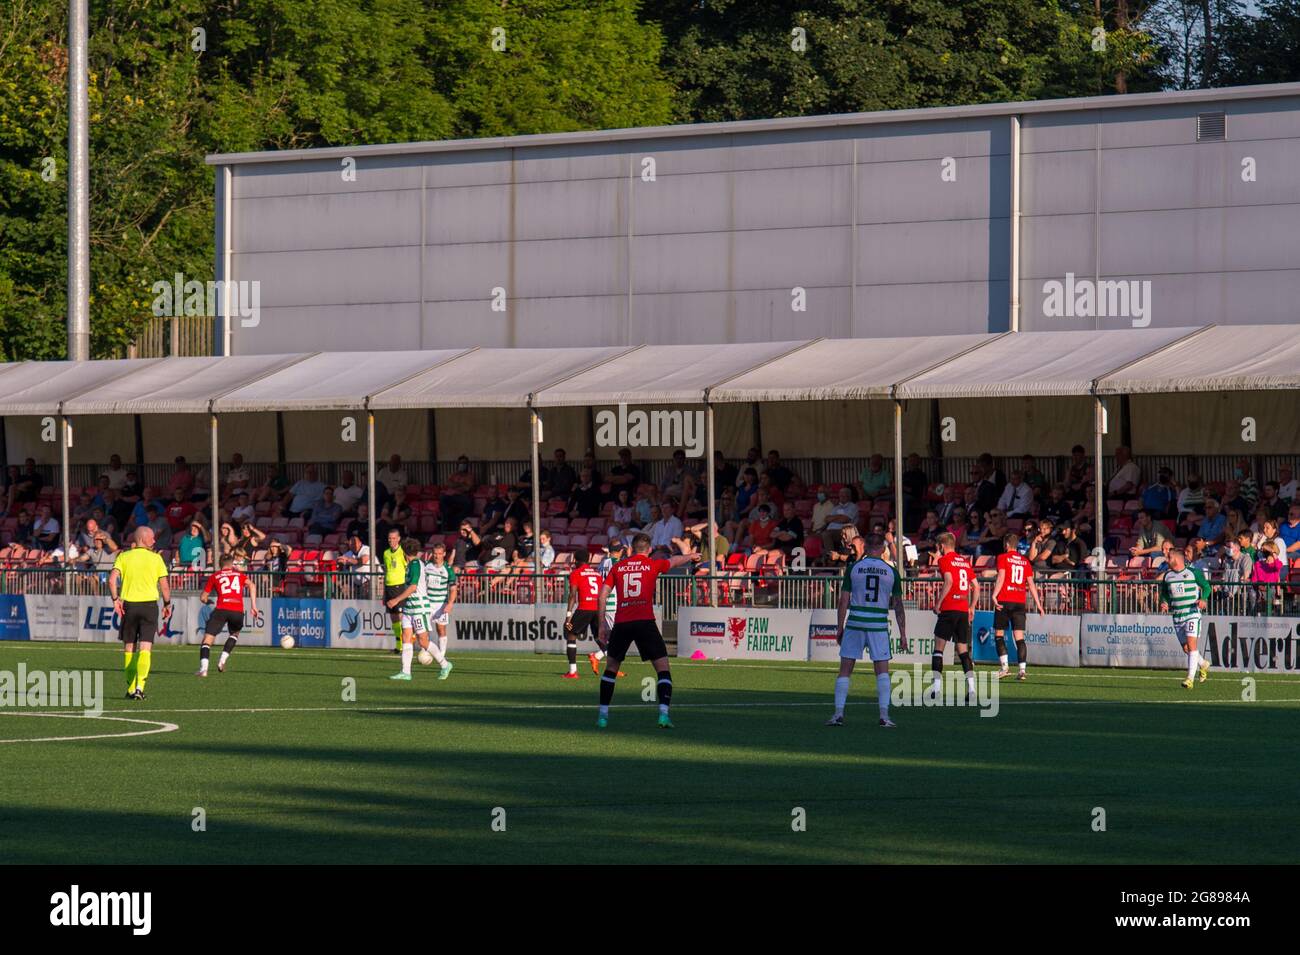 Oswestry, England 15 July 2021. UEFA Europa Conference League First qualifying round match between The New Saints and Glentoran. Stock Photo